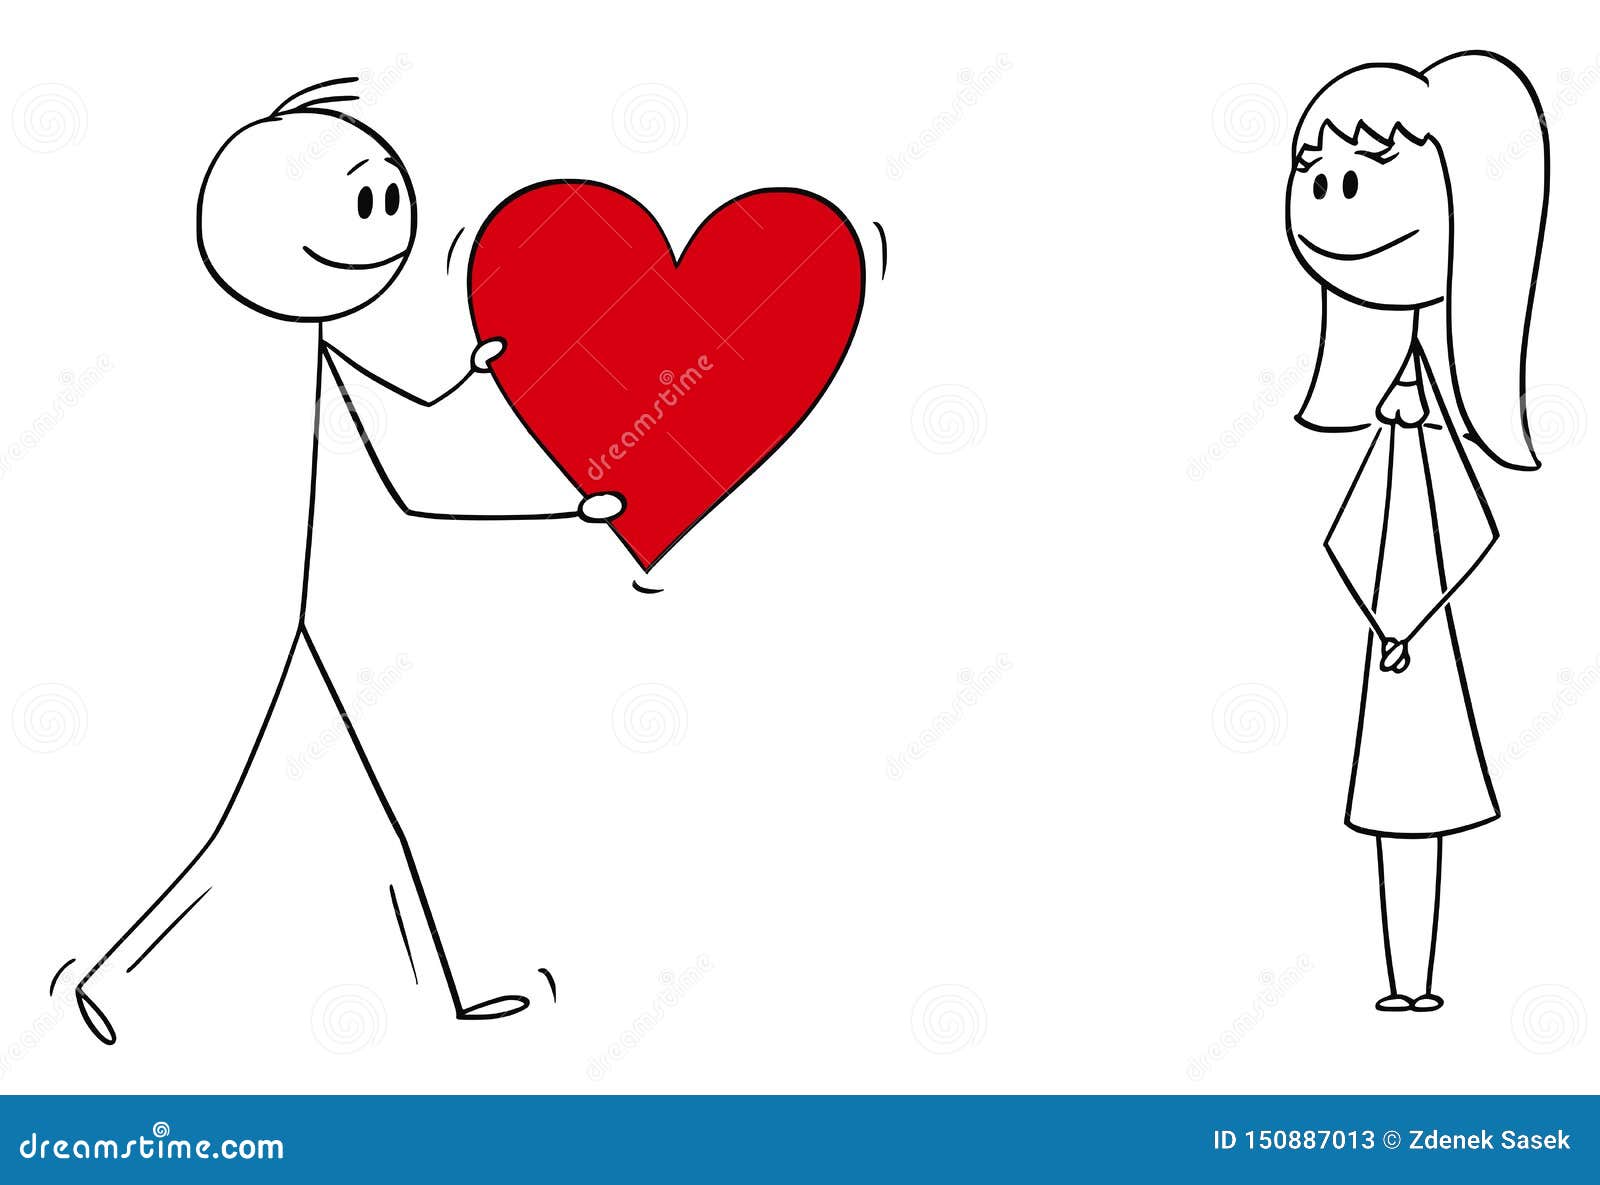 Vector Cartoon of Man or Boy in Love Giving Big Romantic Red Heart To Woman  or Girl Stock Vector - Illustration of happy, humor: 150887013